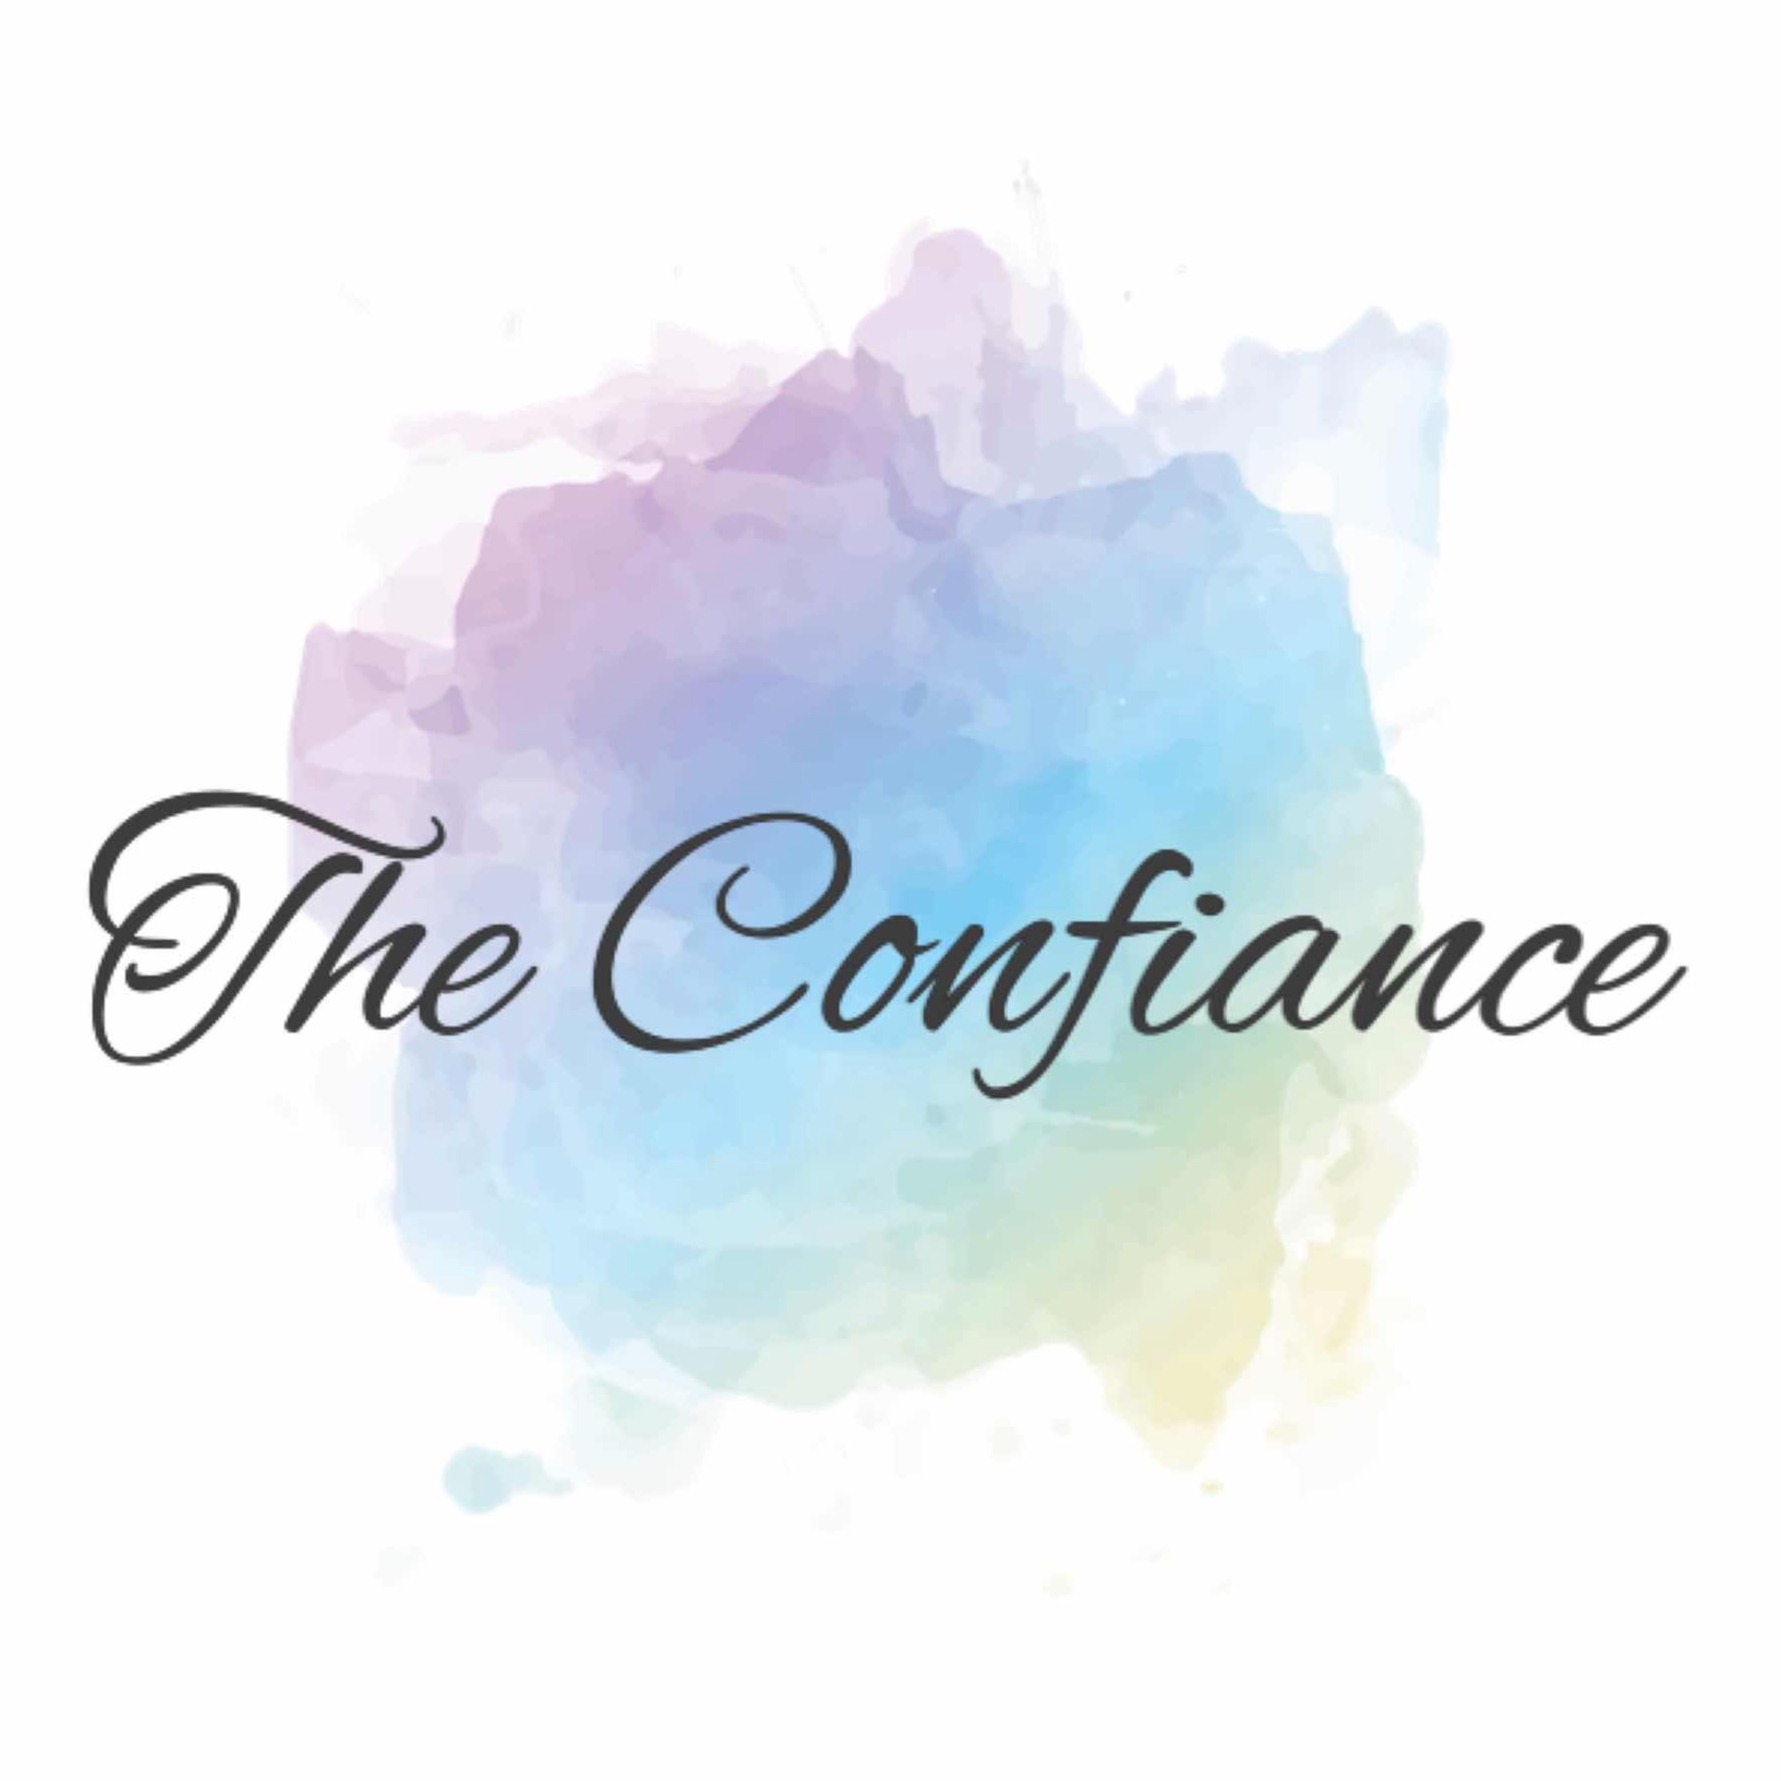 Shop online with The Confiance PH now! Visit The Confiance PH on 